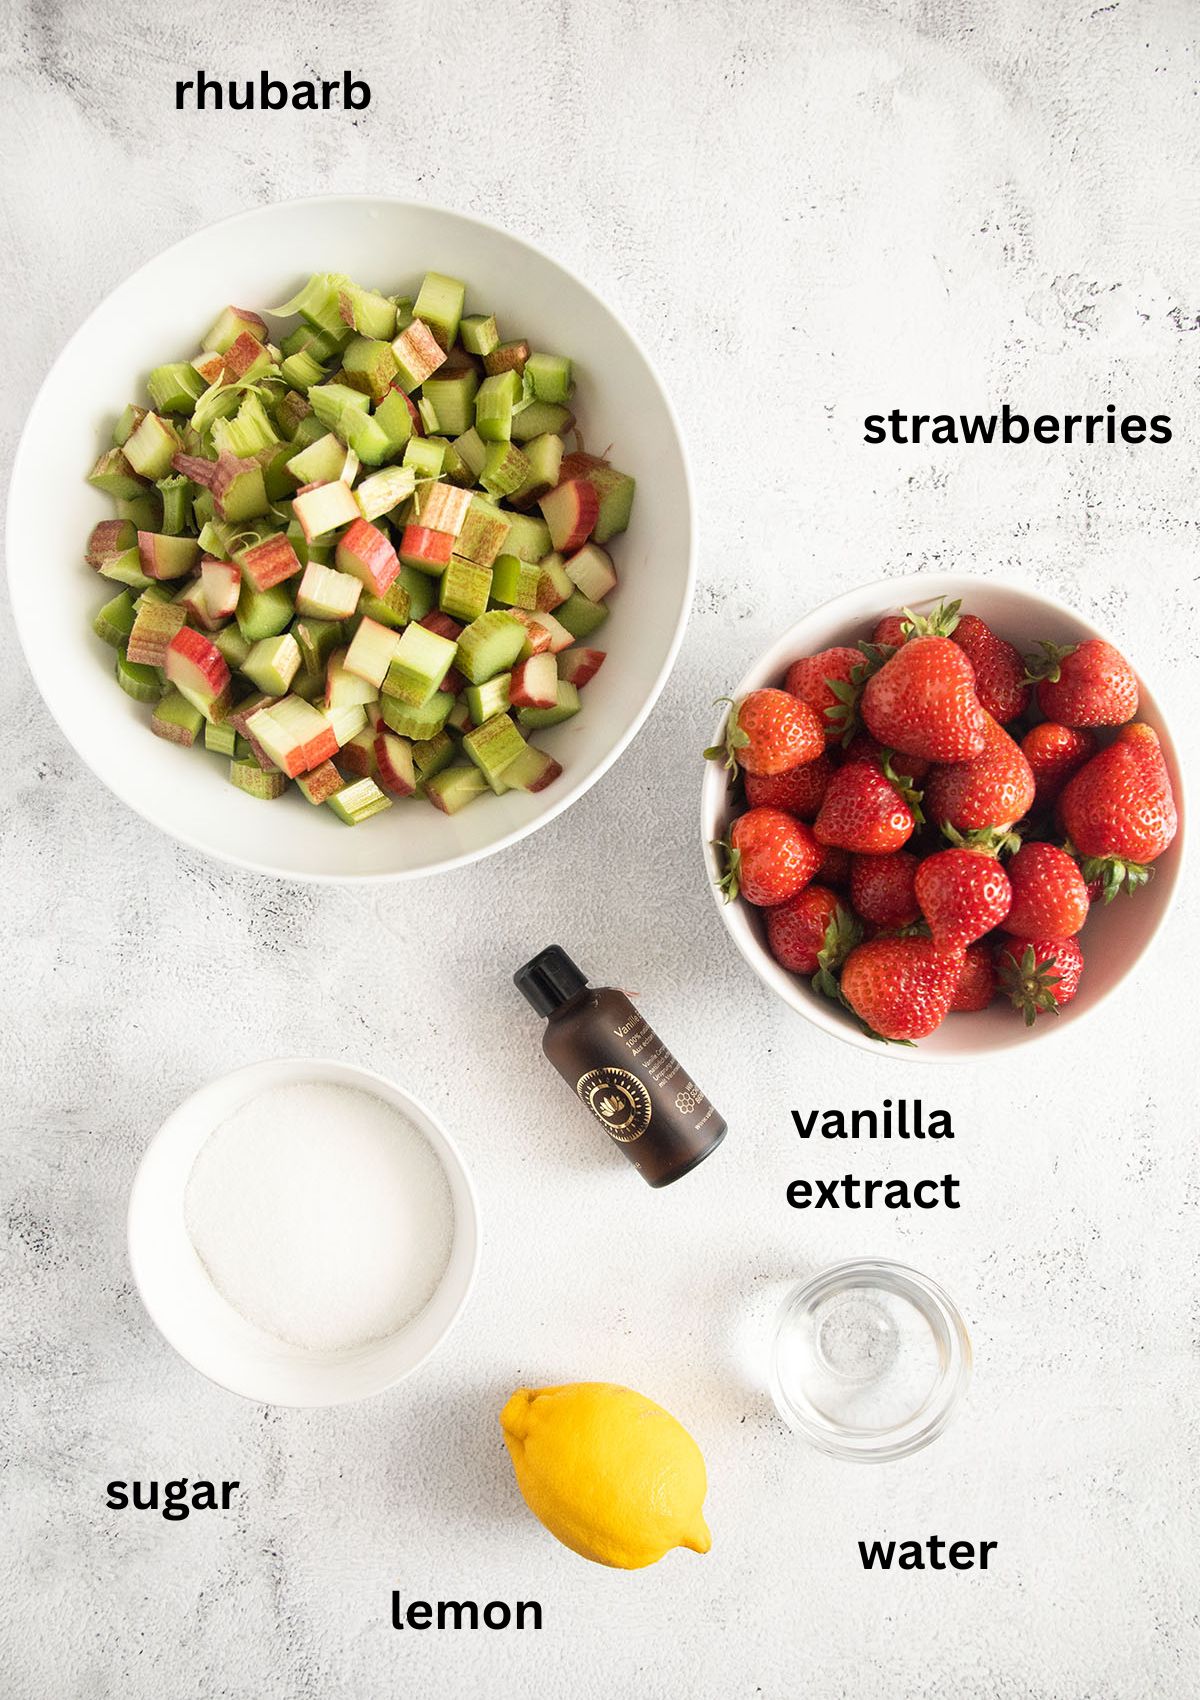 listed ingredients for making compote with rhubarb, strawberries, lemon peel, sugar and vanilla.